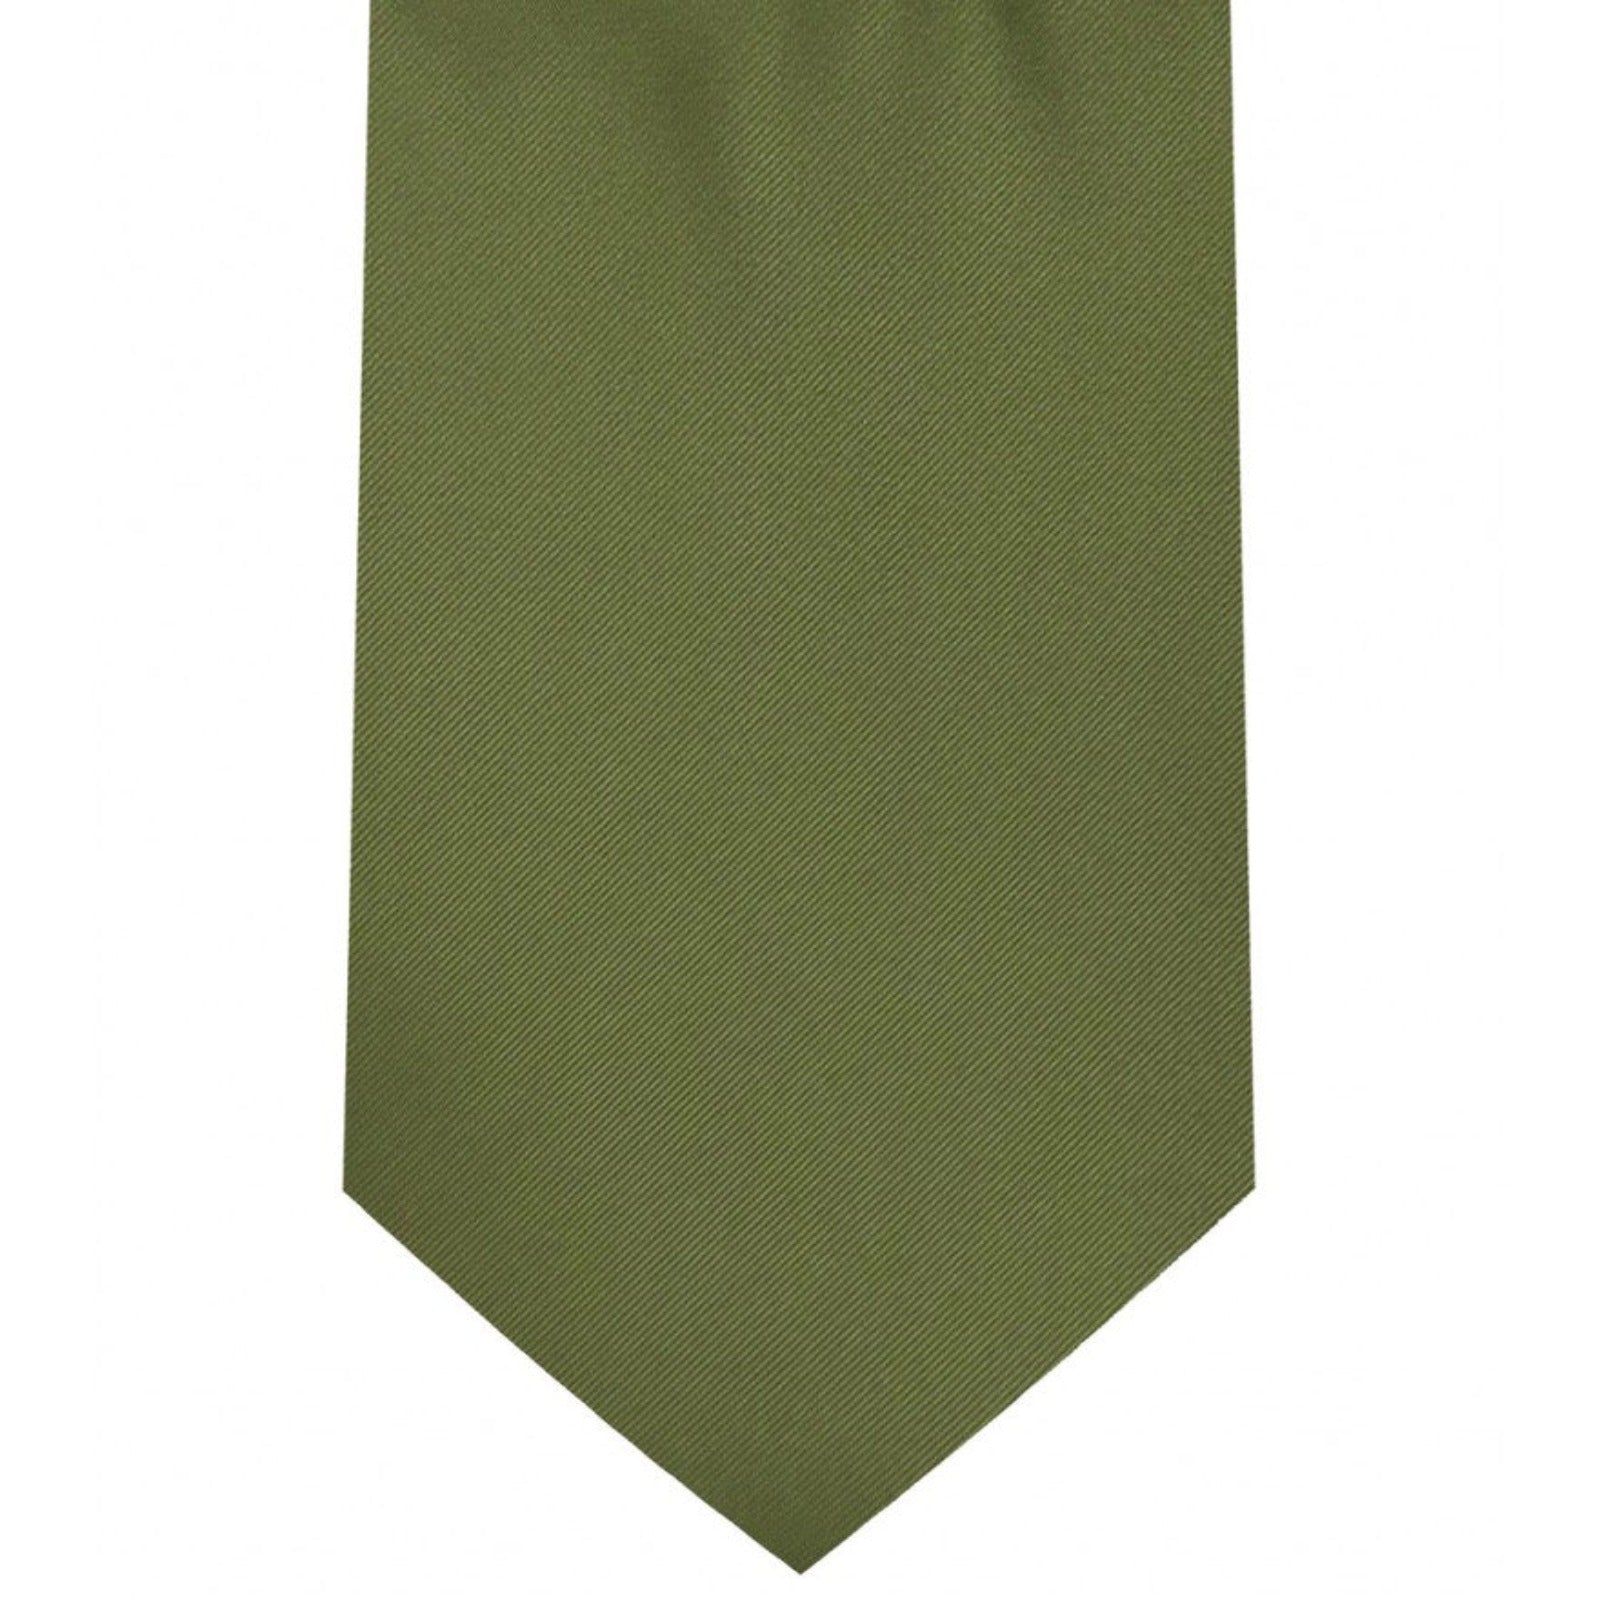 Classic Dark Olive Tie Regular width 3.5 inches With Matching Pocket Square | KCT Menswear 